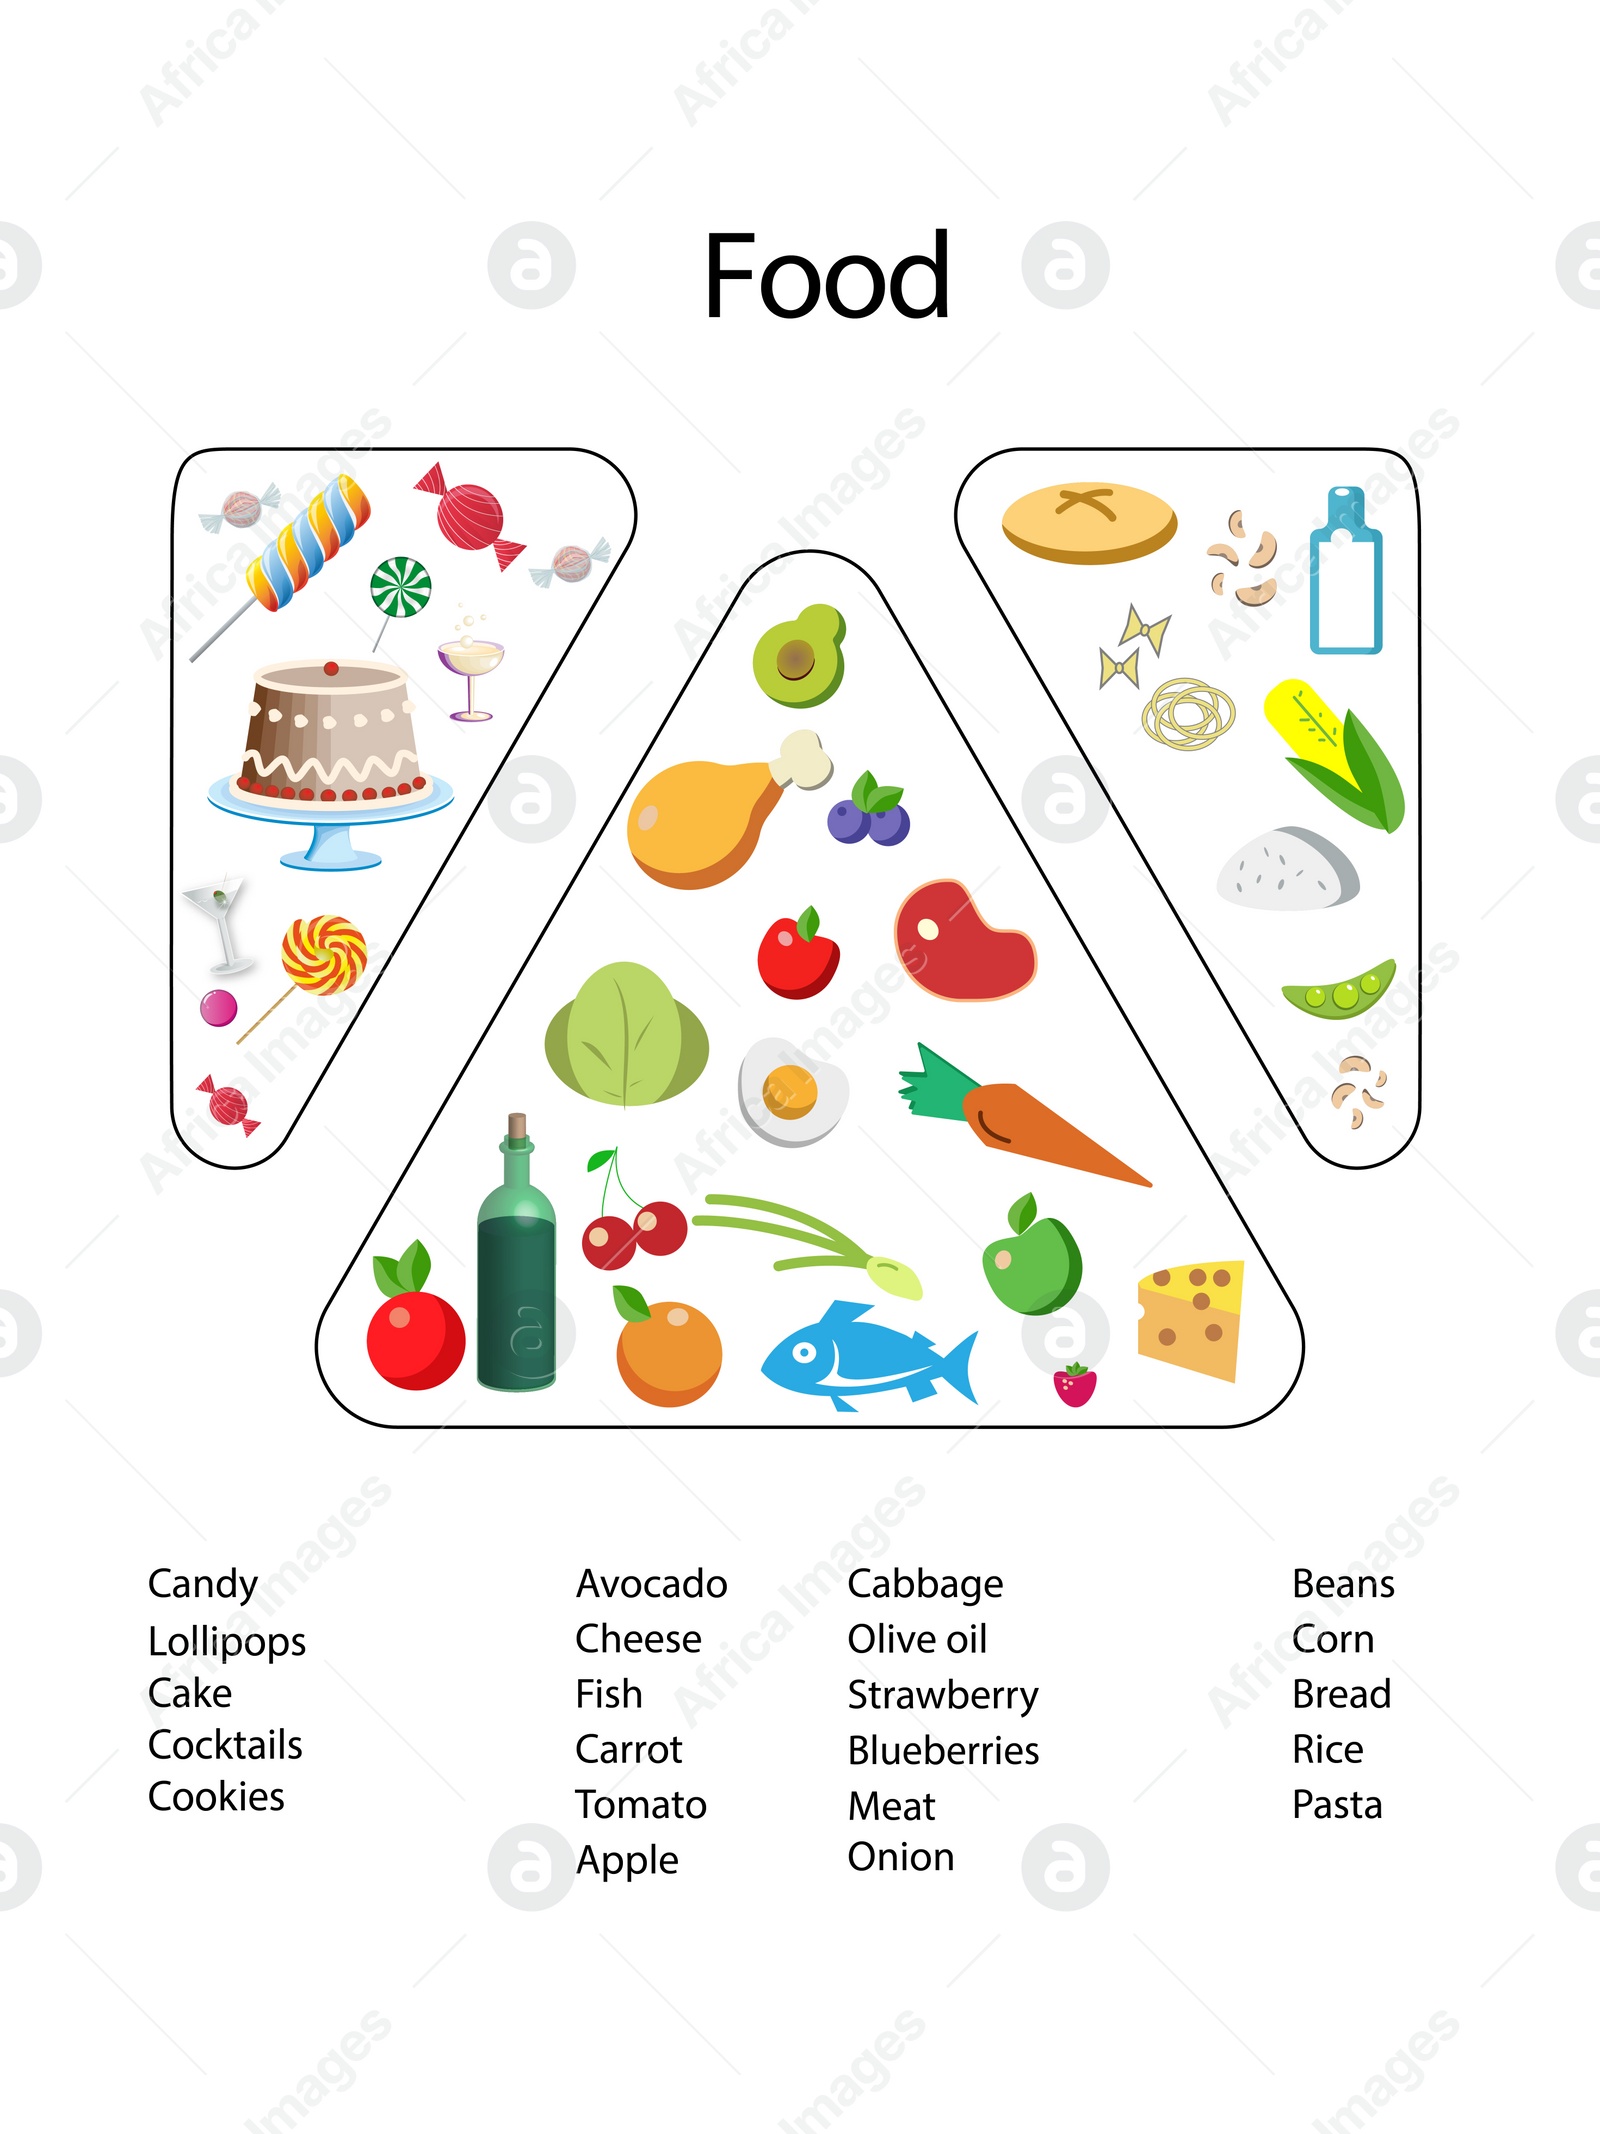 Illustration of Illustrations and food list on white background. Nutritionist's recommendations